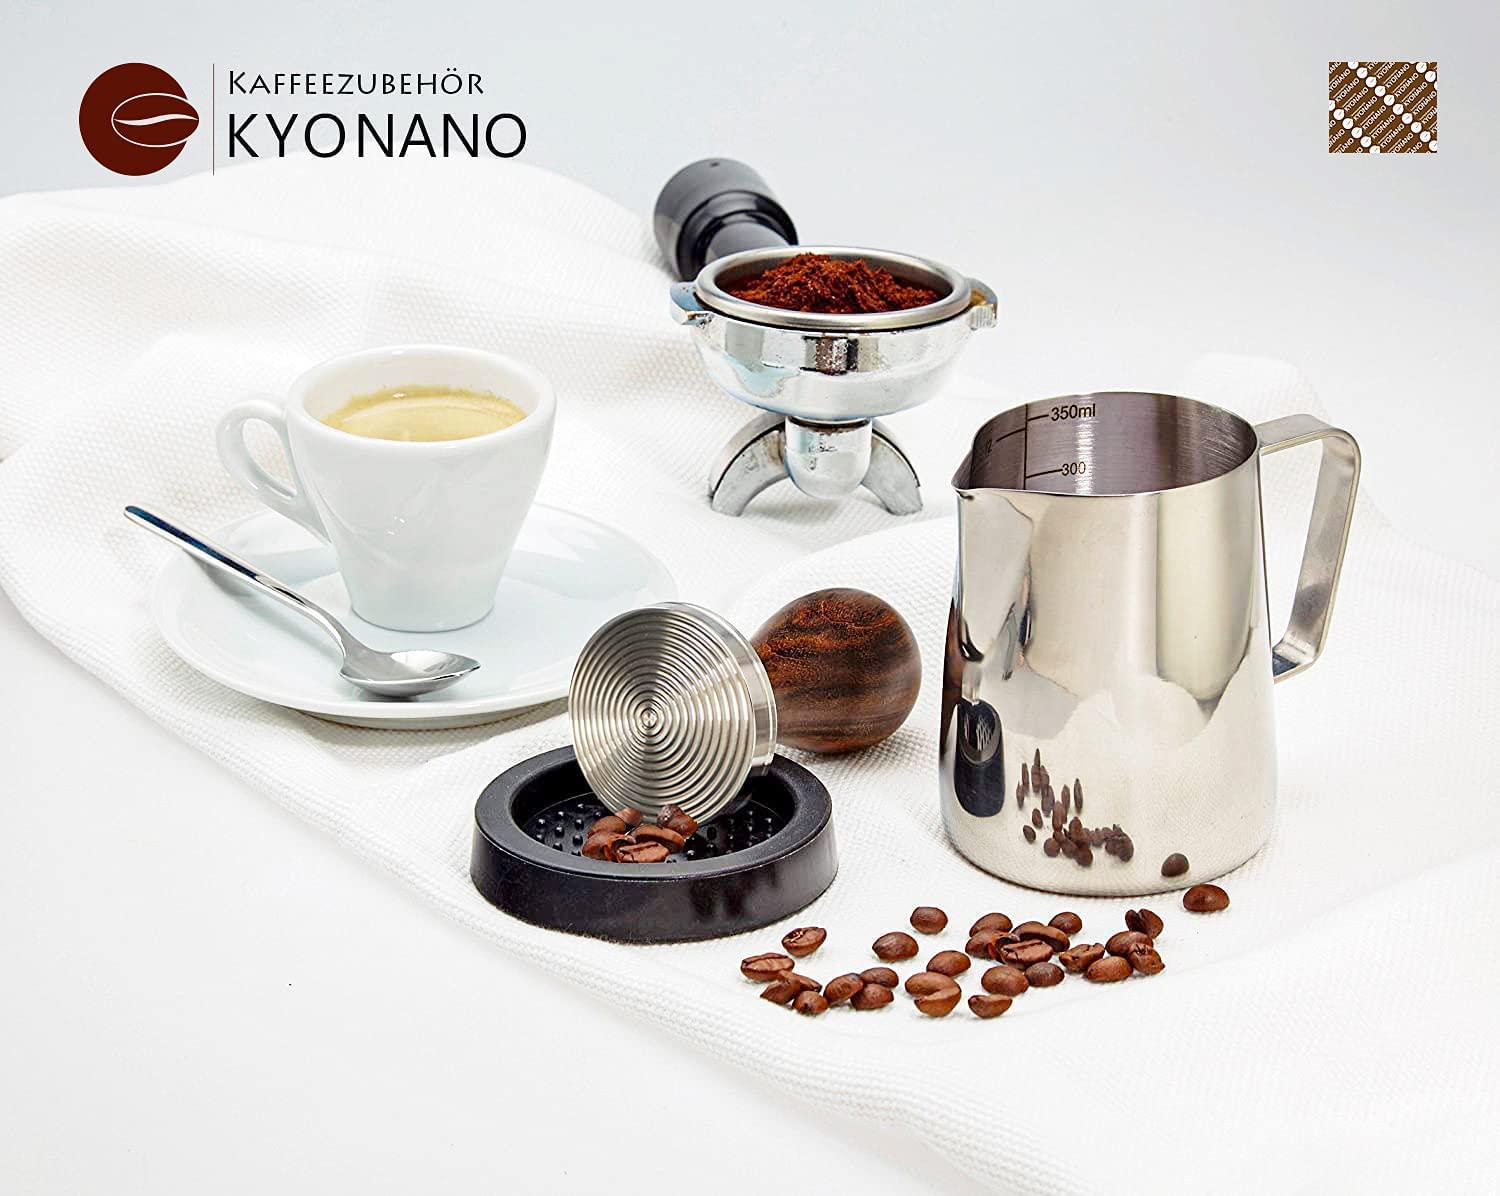 KYONANO, KYONANO 53mm Coffee Tamper - Espresso Coffee Tamper - Coffee Tamper with Stainless Steel Base and Scented Rosewood Handle - Modern Professional Barista and Beginner Coffee Shop Supplies